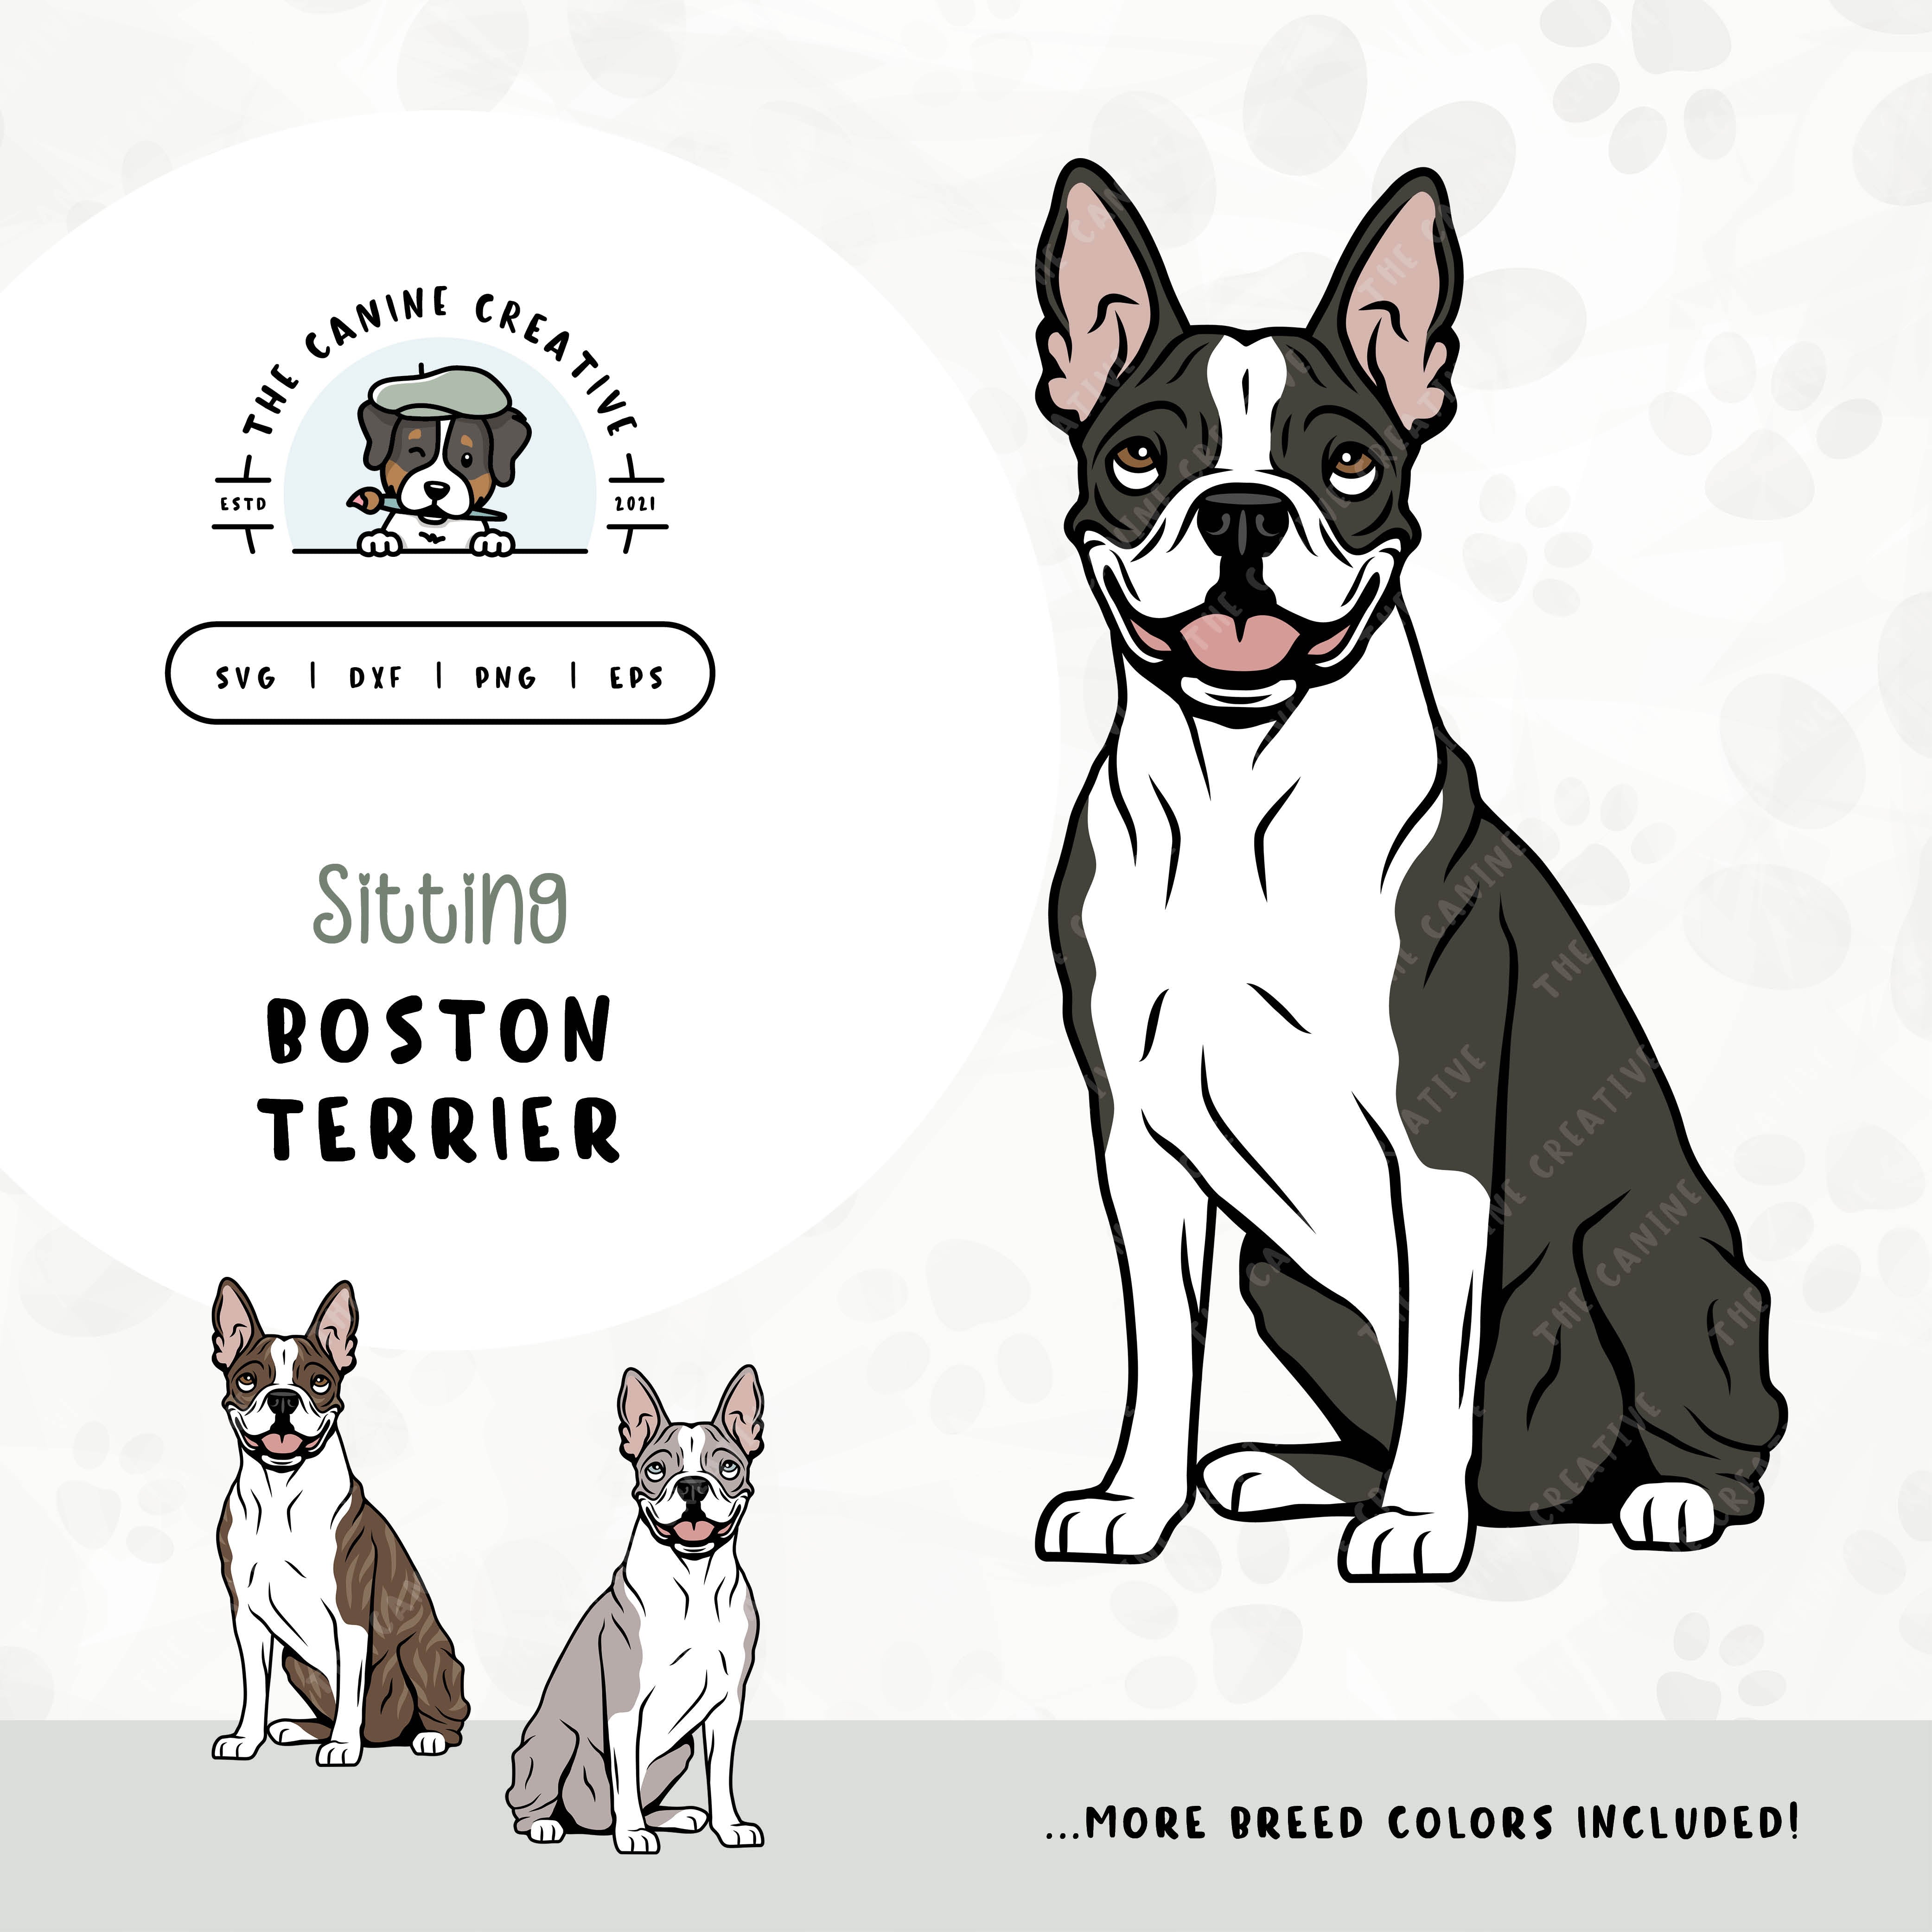 This sitting dog design features a Boston Terrier. File formats include: SVG, DXF, PNG, and EPS.